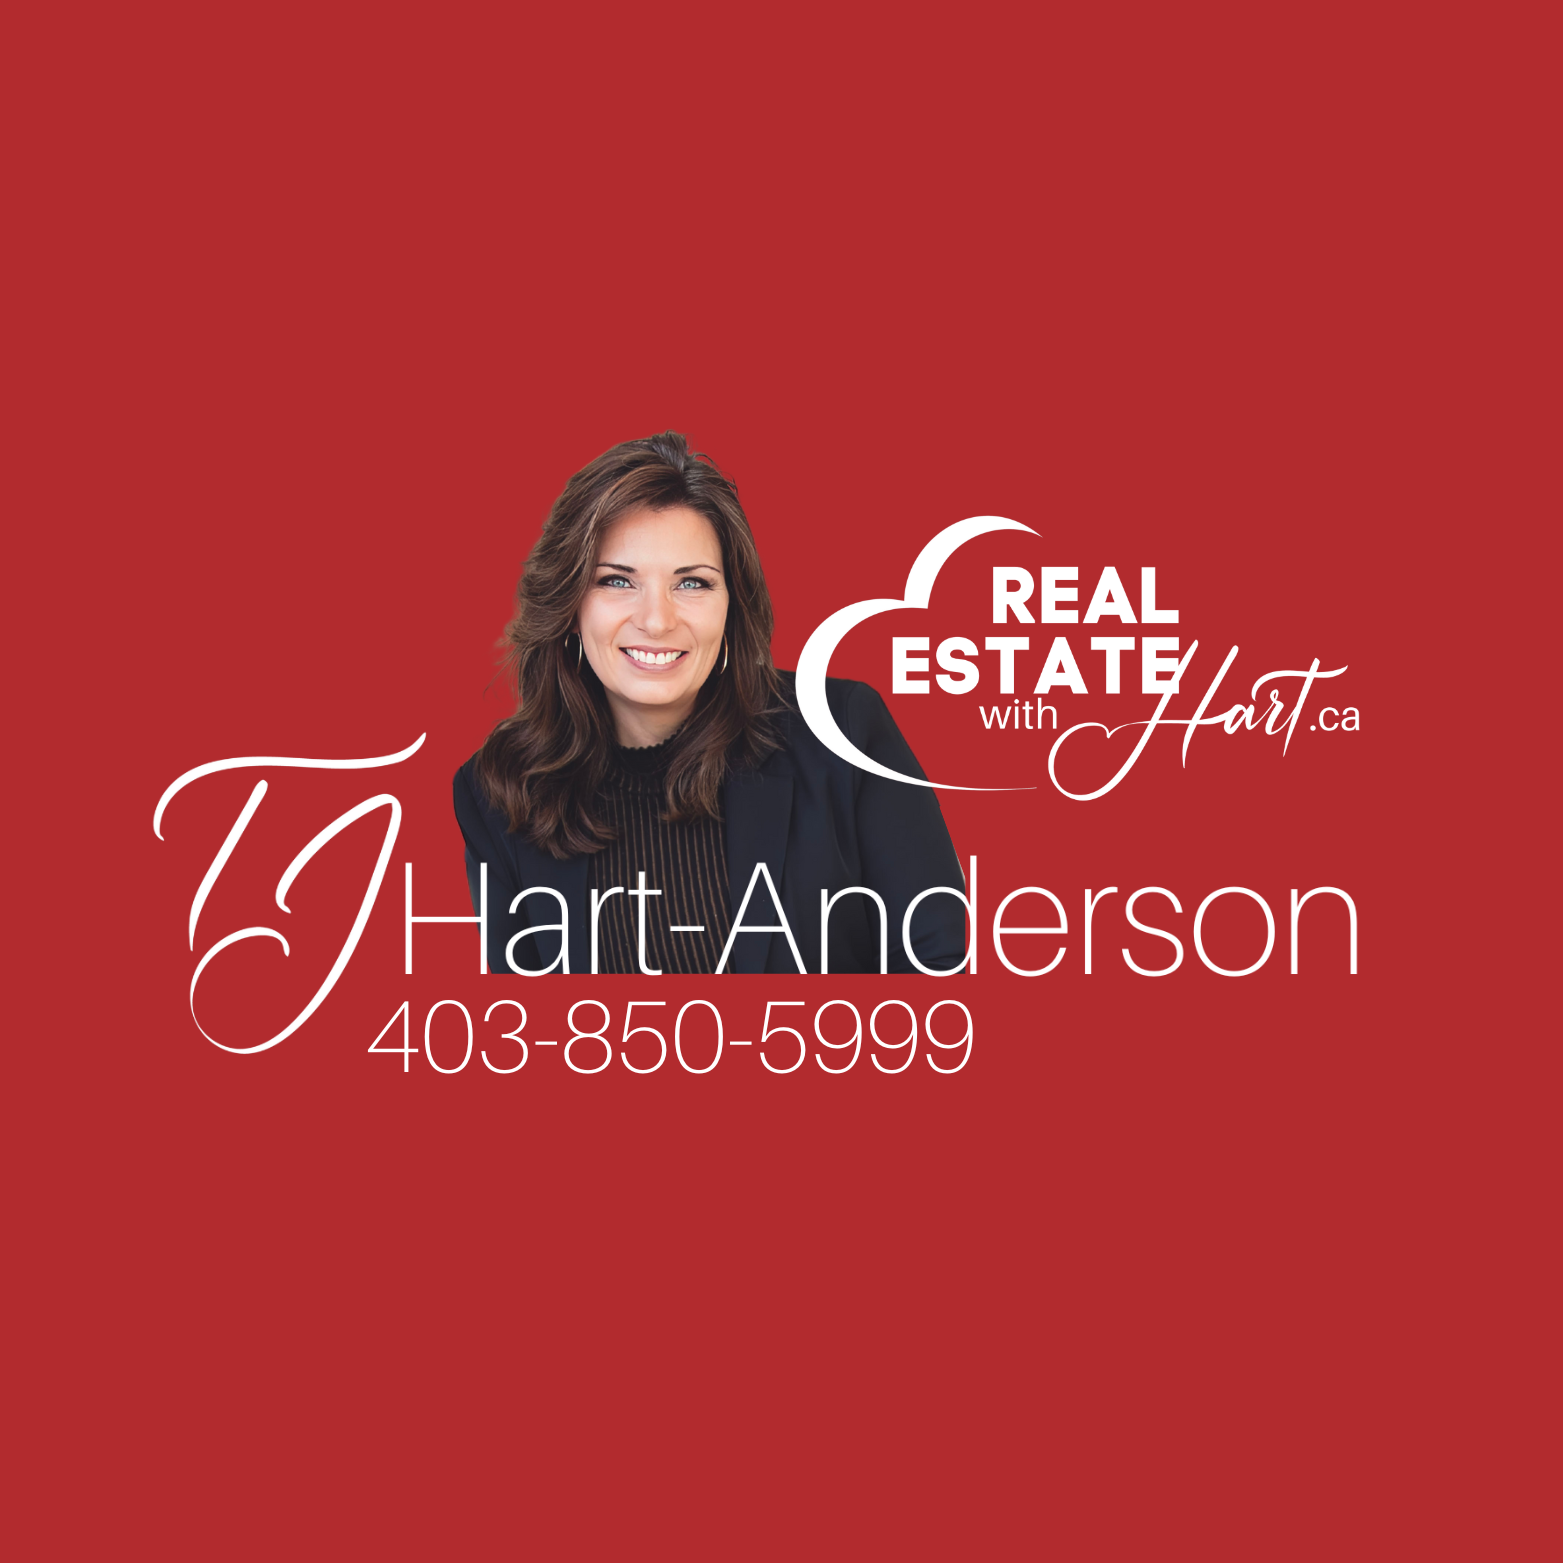 TJ Hart-Anderson | Real Estate With Hart